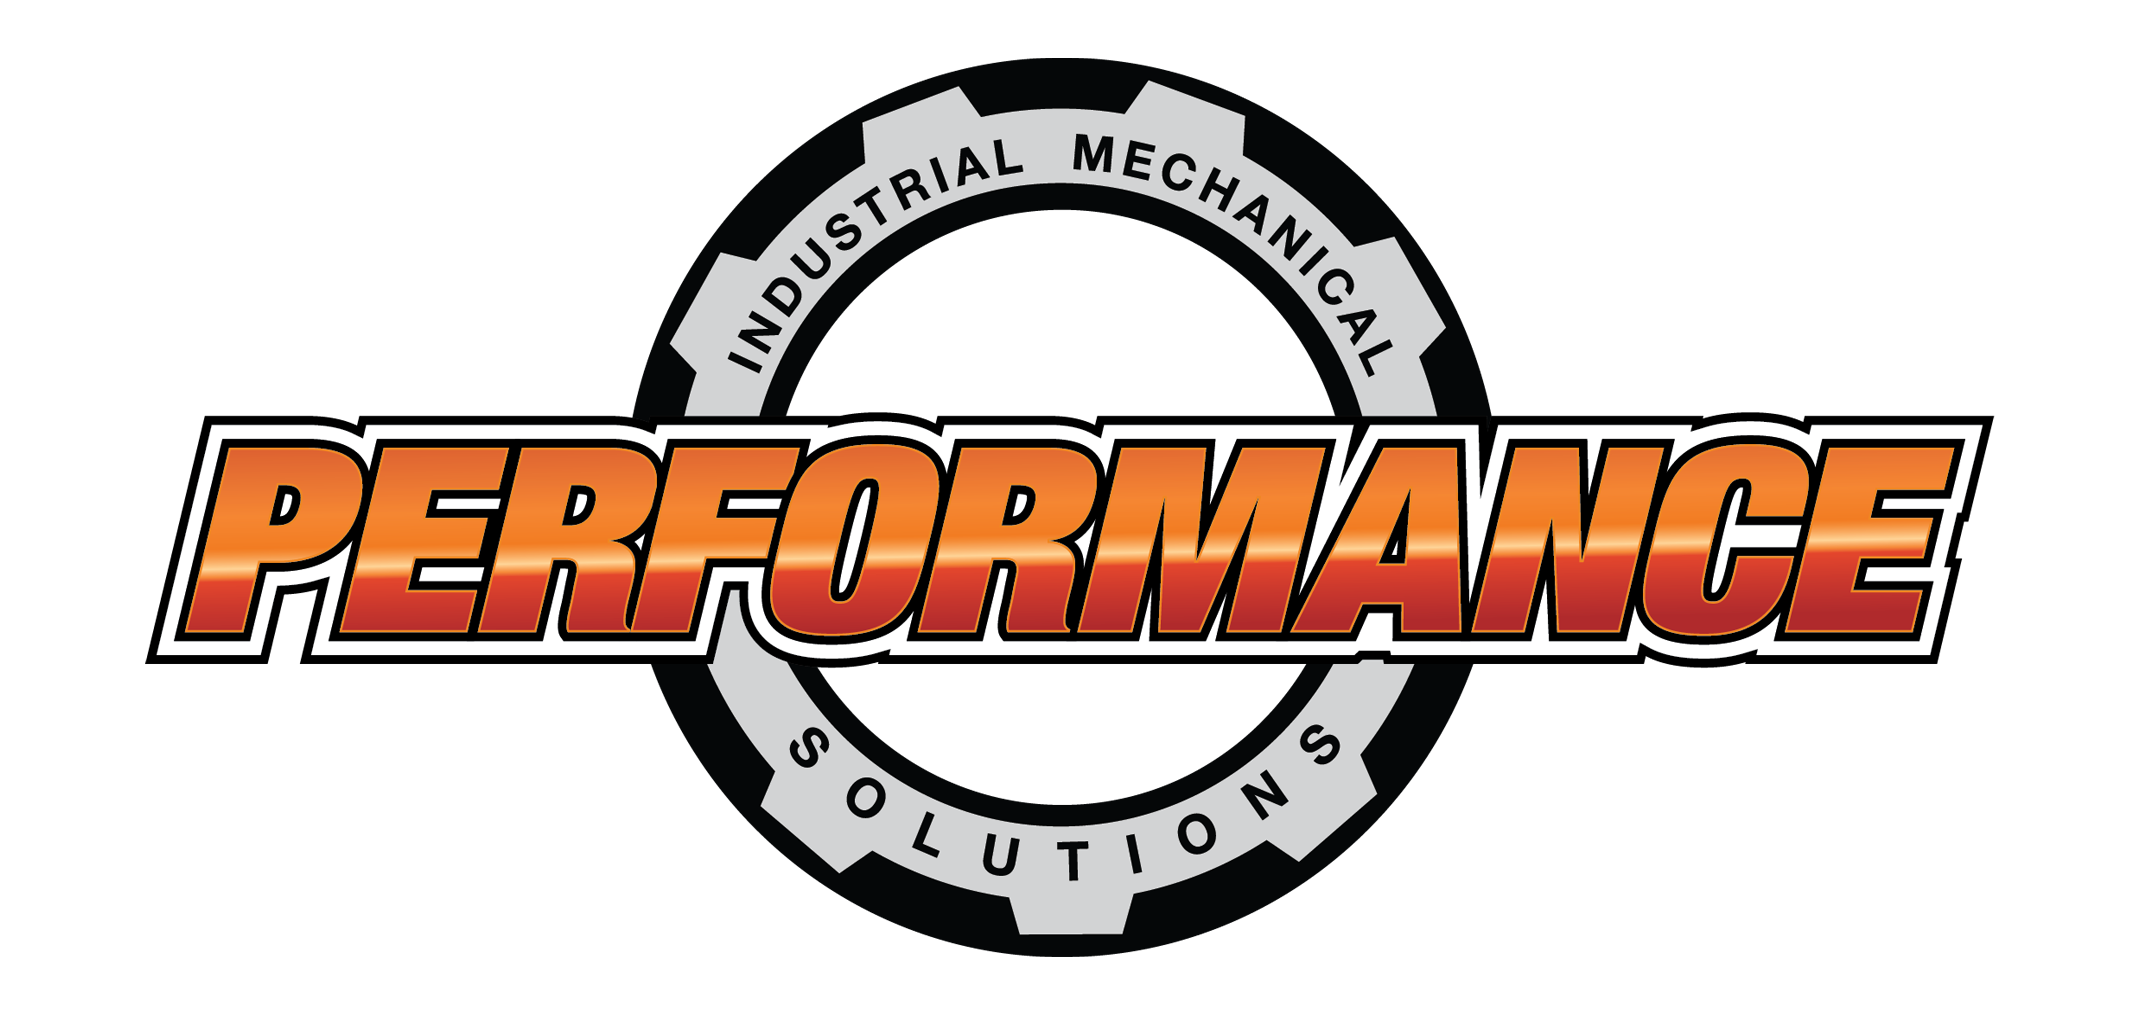 Performance – Industrial Mechanical Solutions Logo